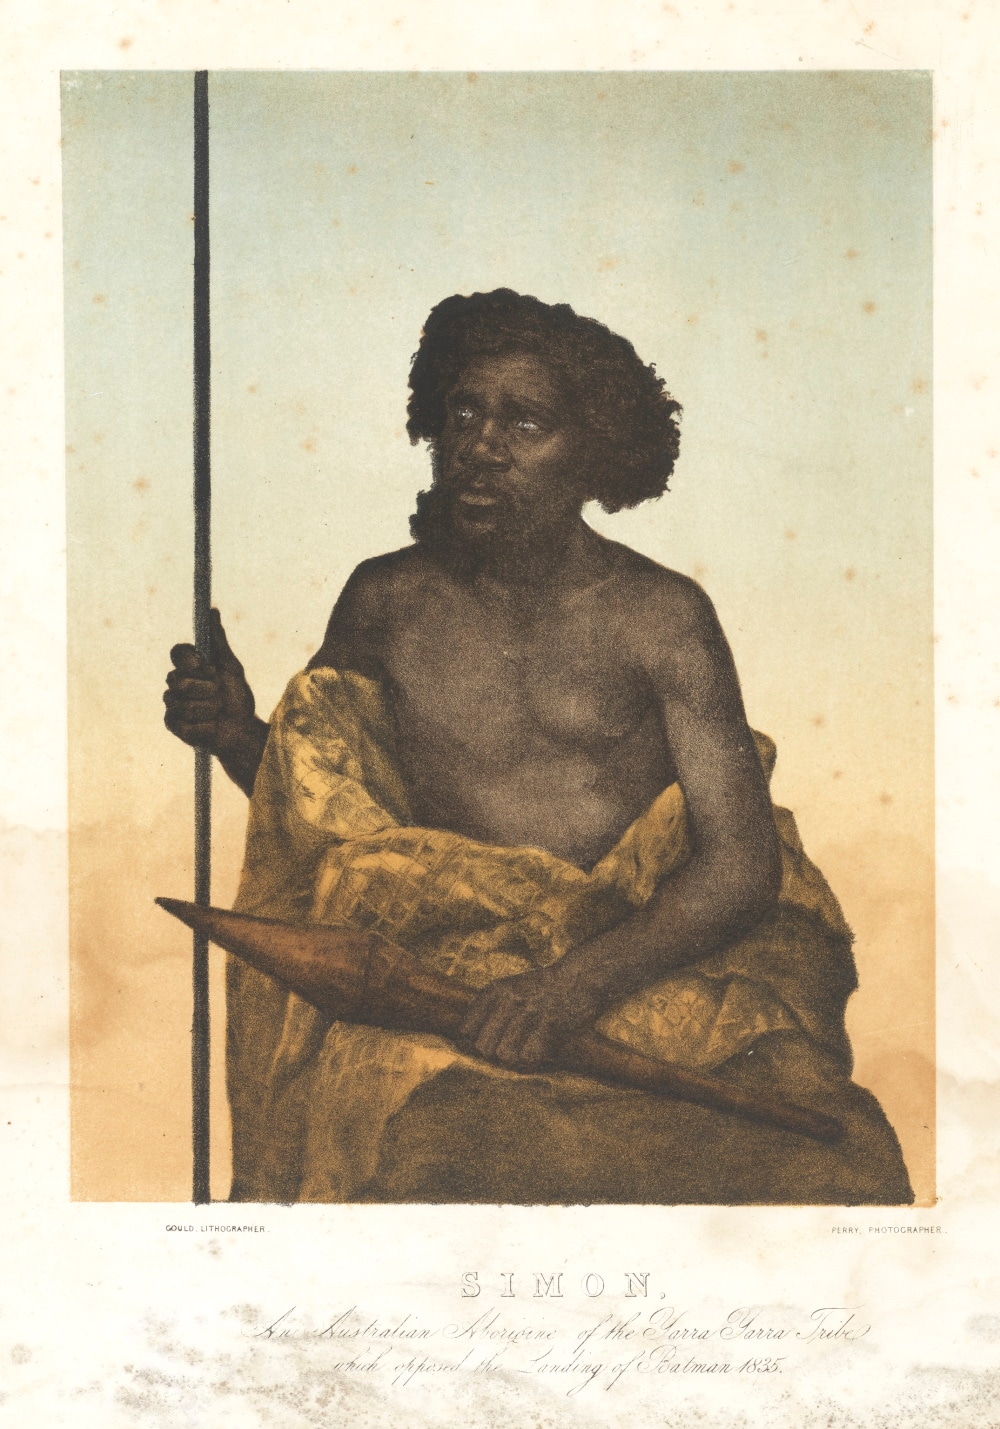 Simon, an Australian Aborigine of the Yarra Yarra tribe; Gould Lithographer; Perry Photographer (State Library of New South Wales)